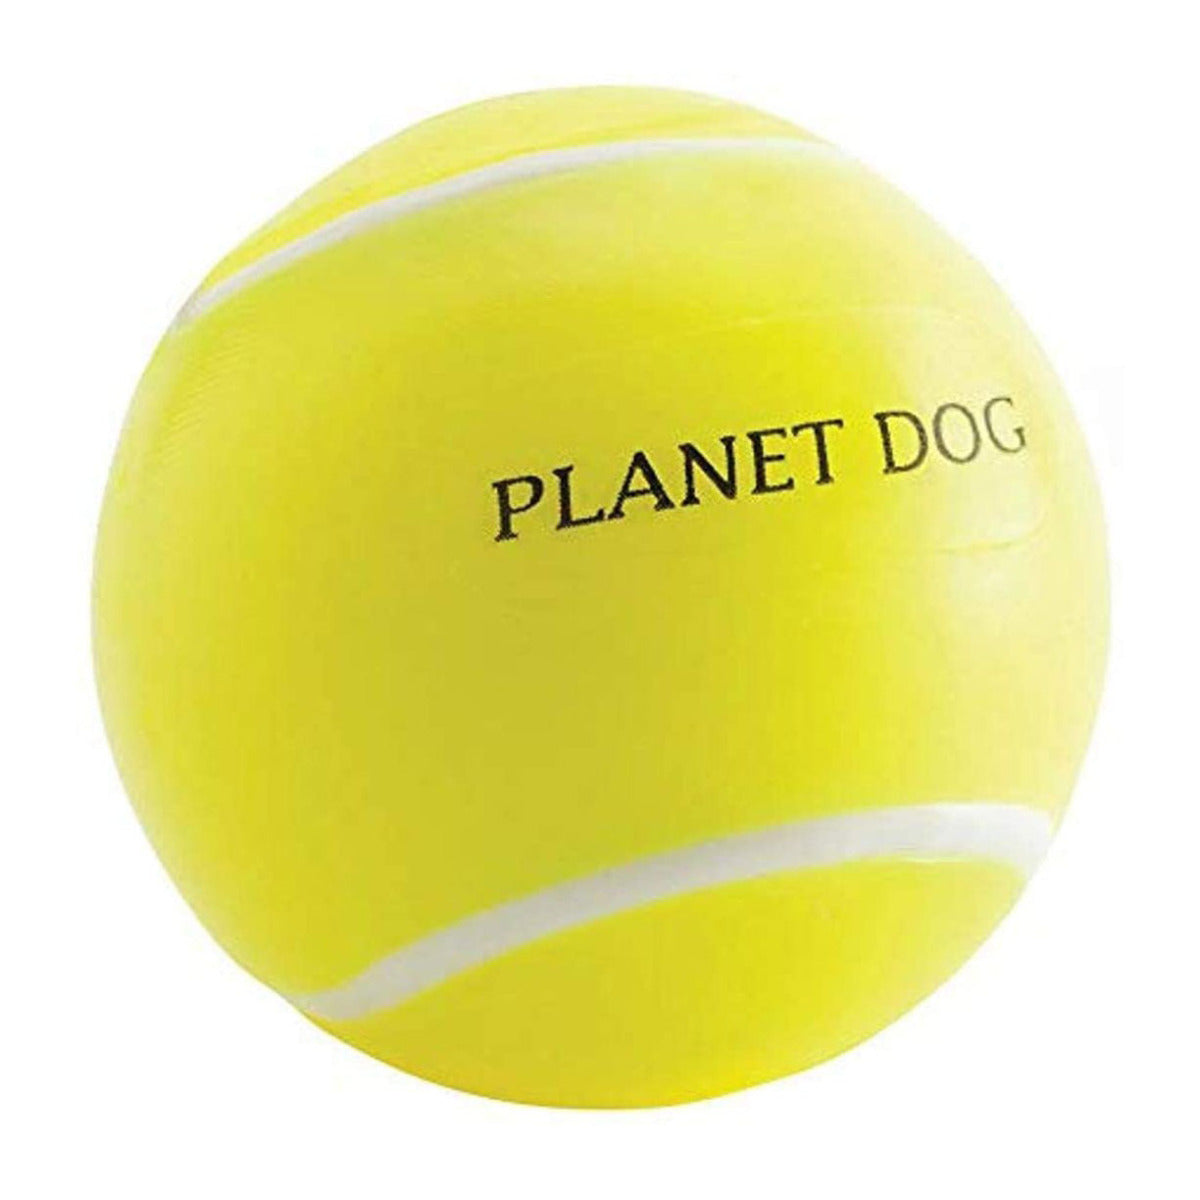 Planet Dog Orbee-Tuff Snoop Dog Treat Dispenser from Outward Hound Review!  